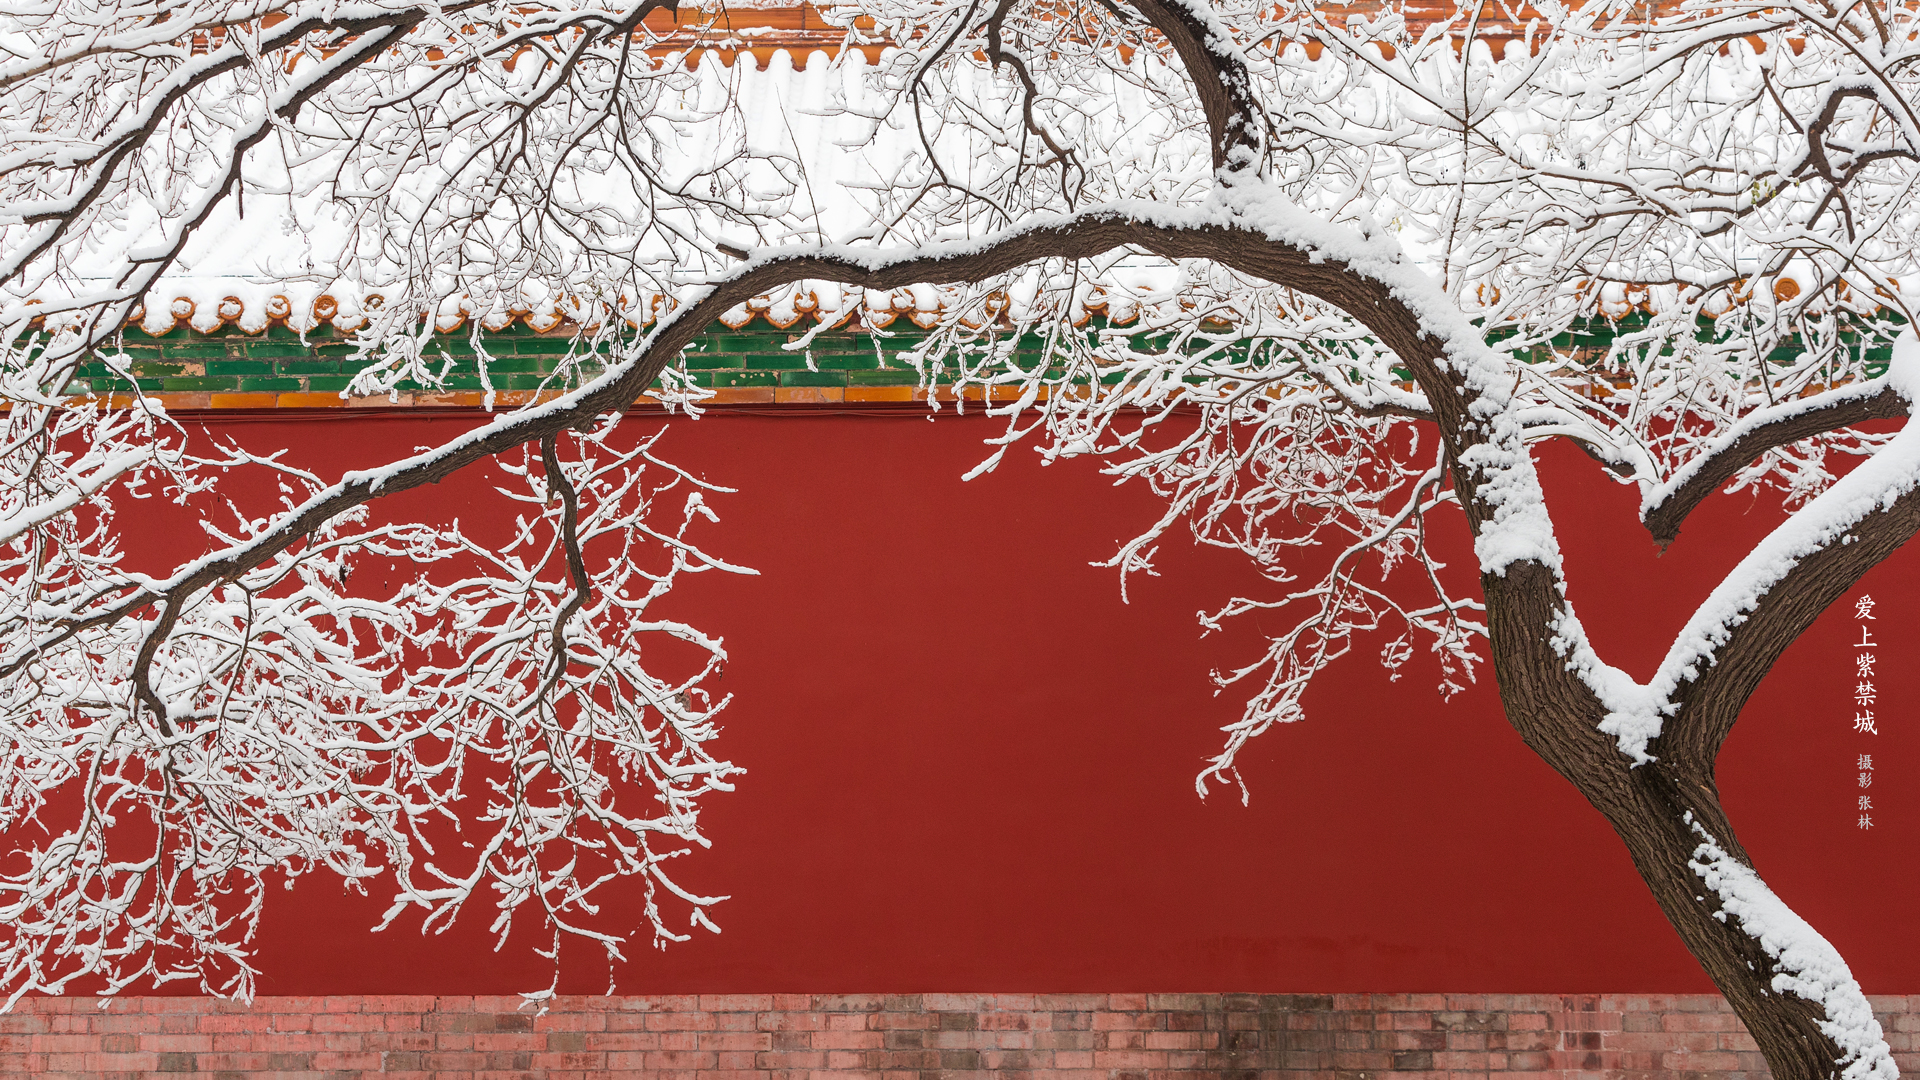 General 1920x1080 Chinese architecture snow trees red background The Imperial Palace